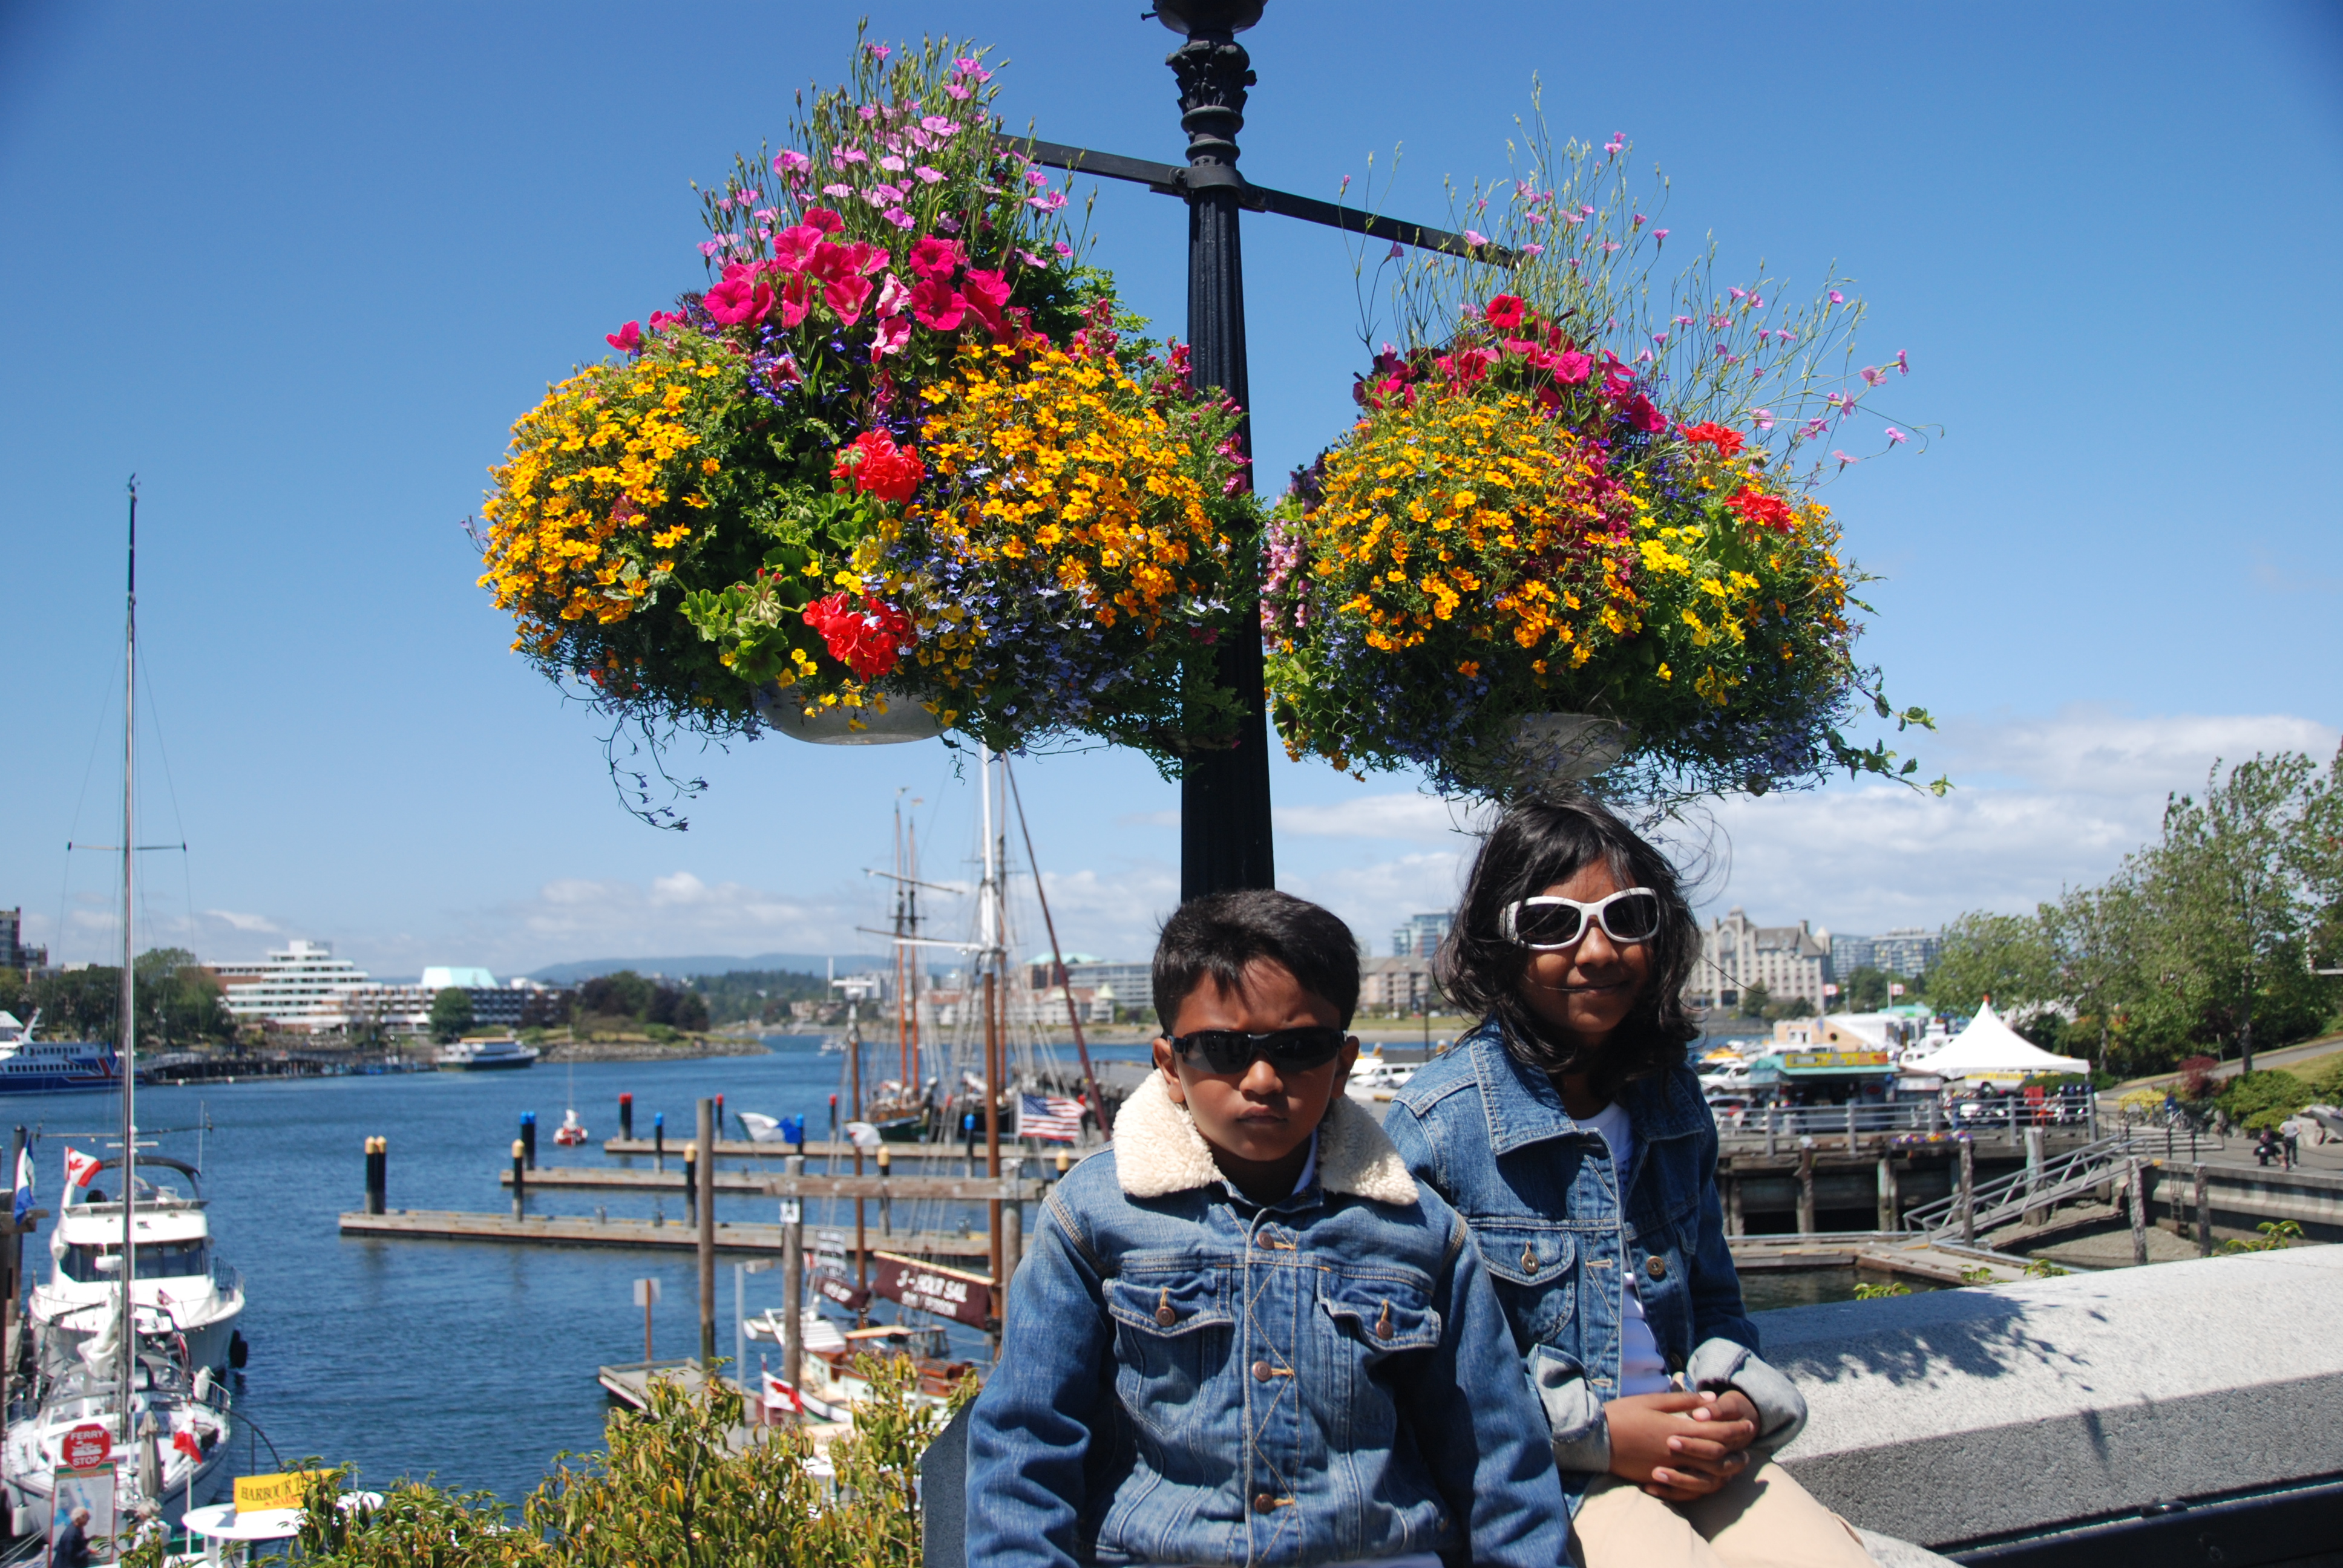 Victoria harbour, British Columbia Photo by Outside Suburbia